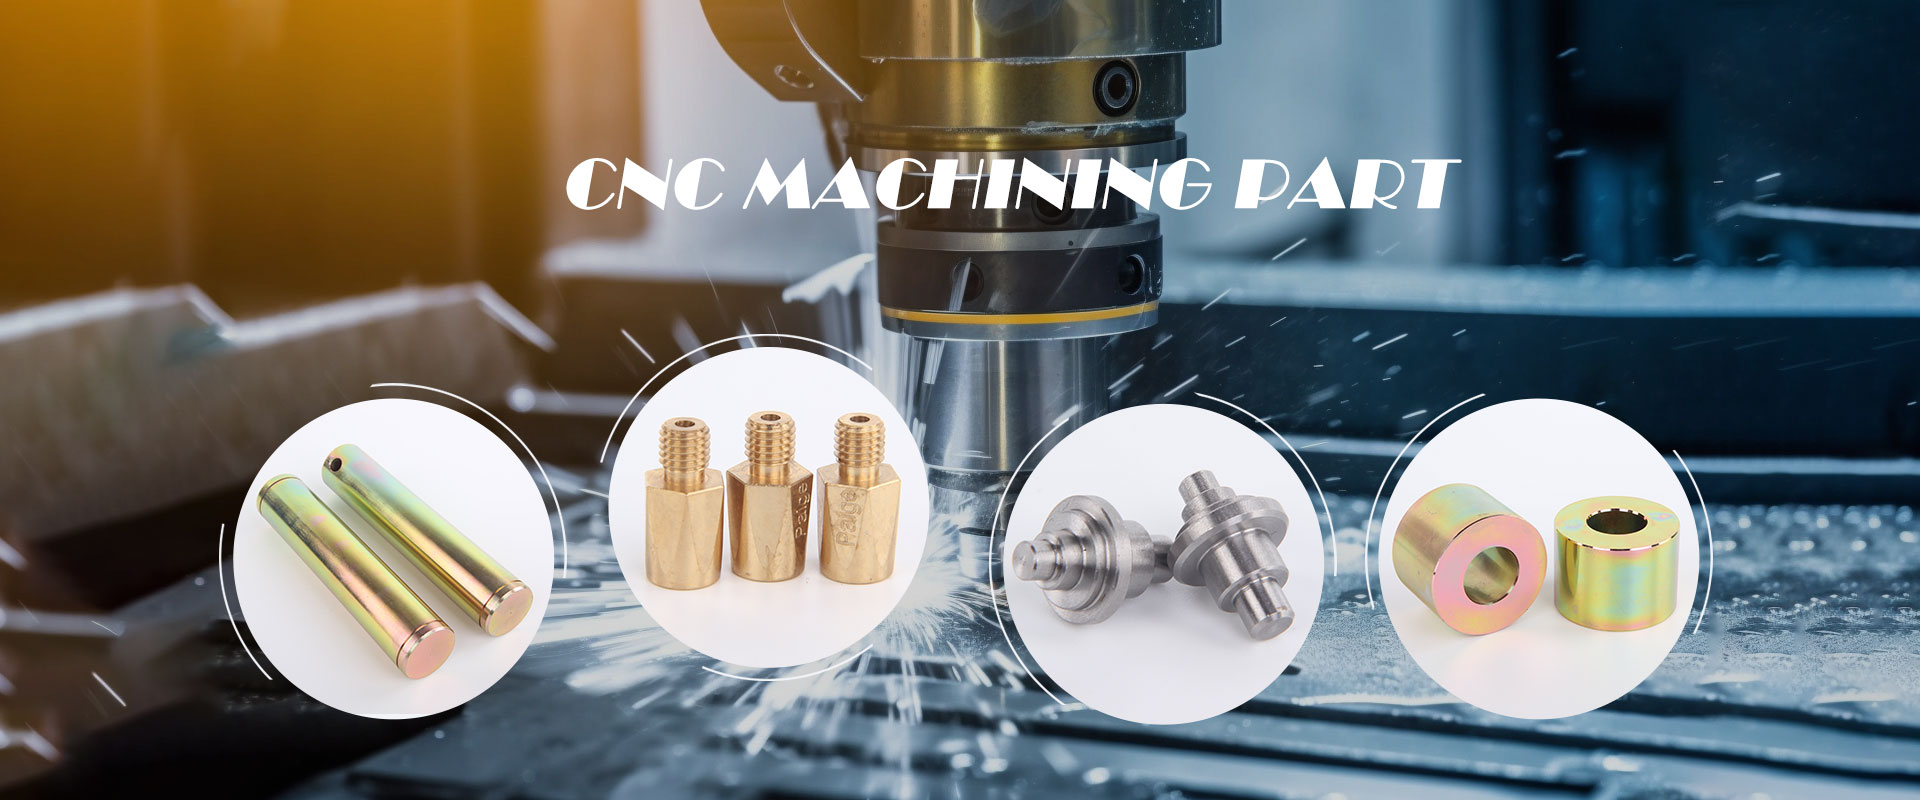 Customized CNC Machining Part Made in China